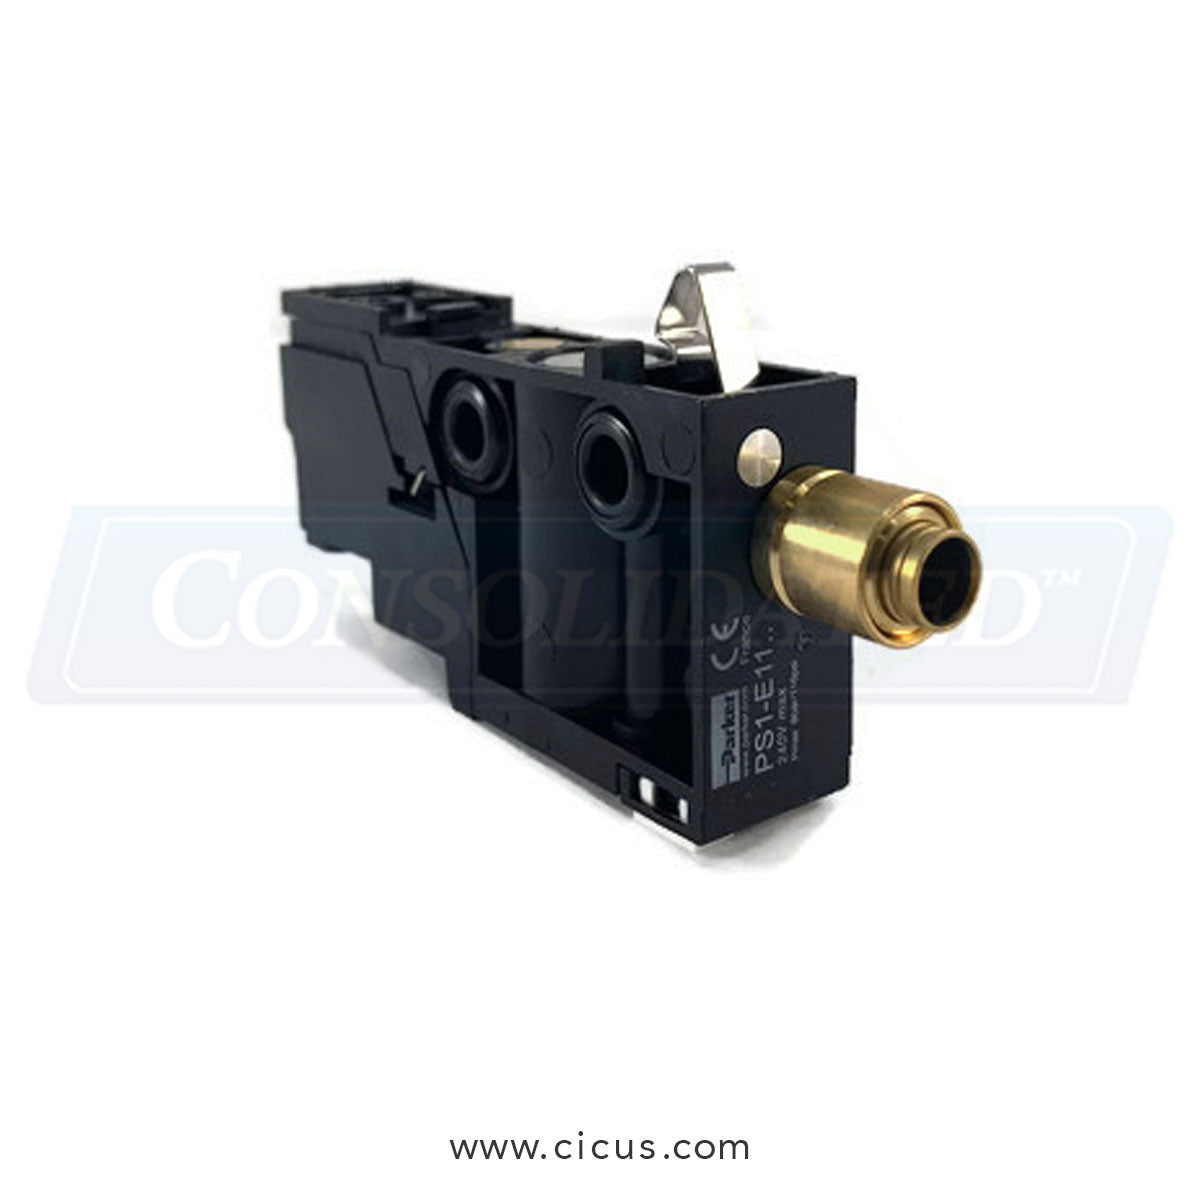 Chicago Dryer Air Valve Single Head w/ Two 1/4" OD [0202-400]